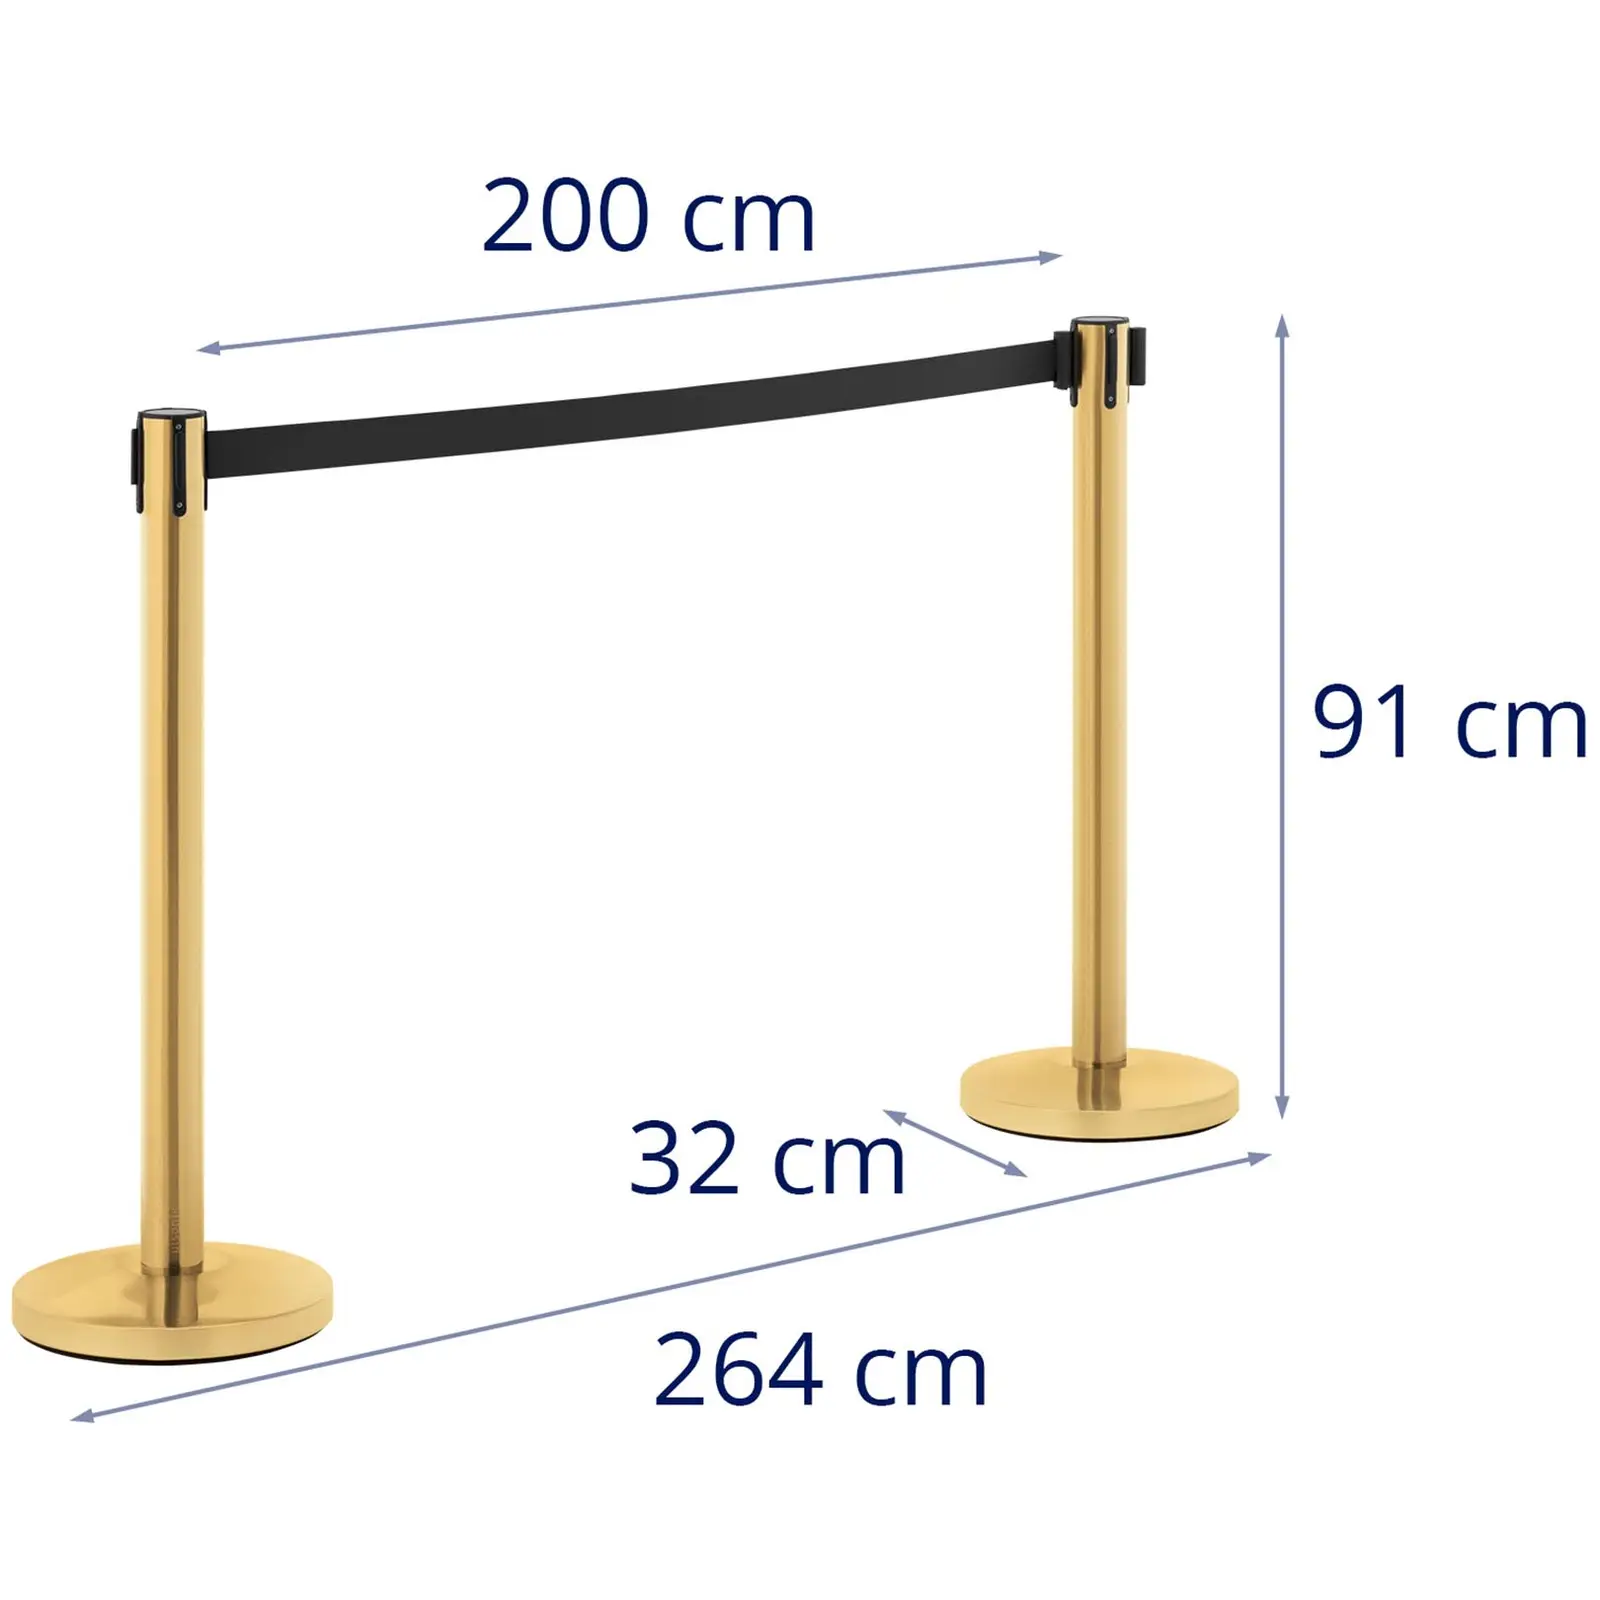 2 Barrier Stands with Strap - 200 cm - colour - gold